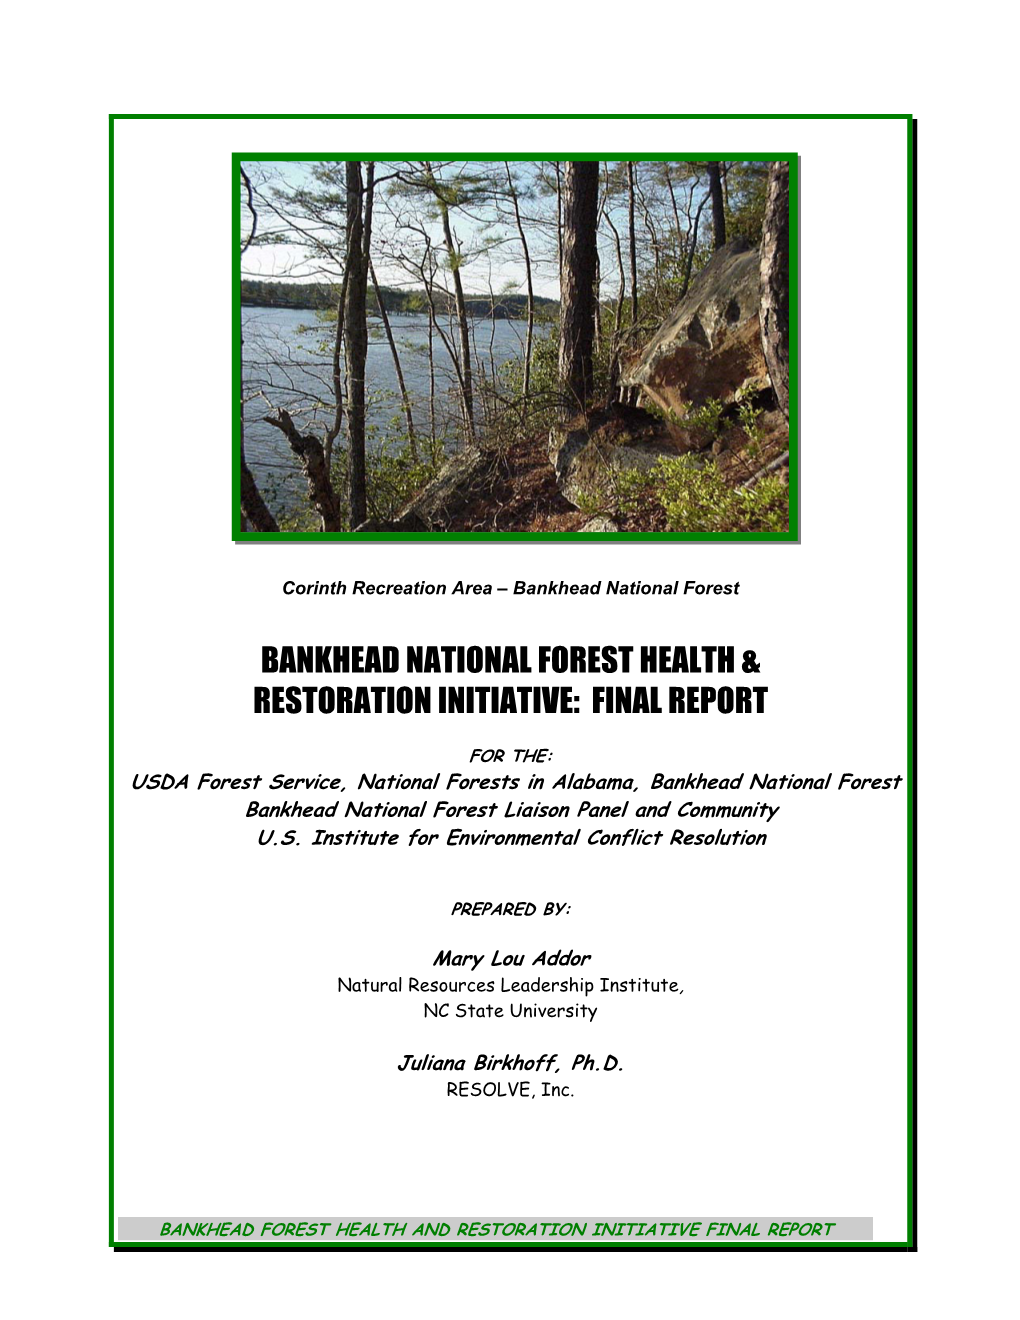 Bankhead National Forest Health & Restoration Initiative: Final Report